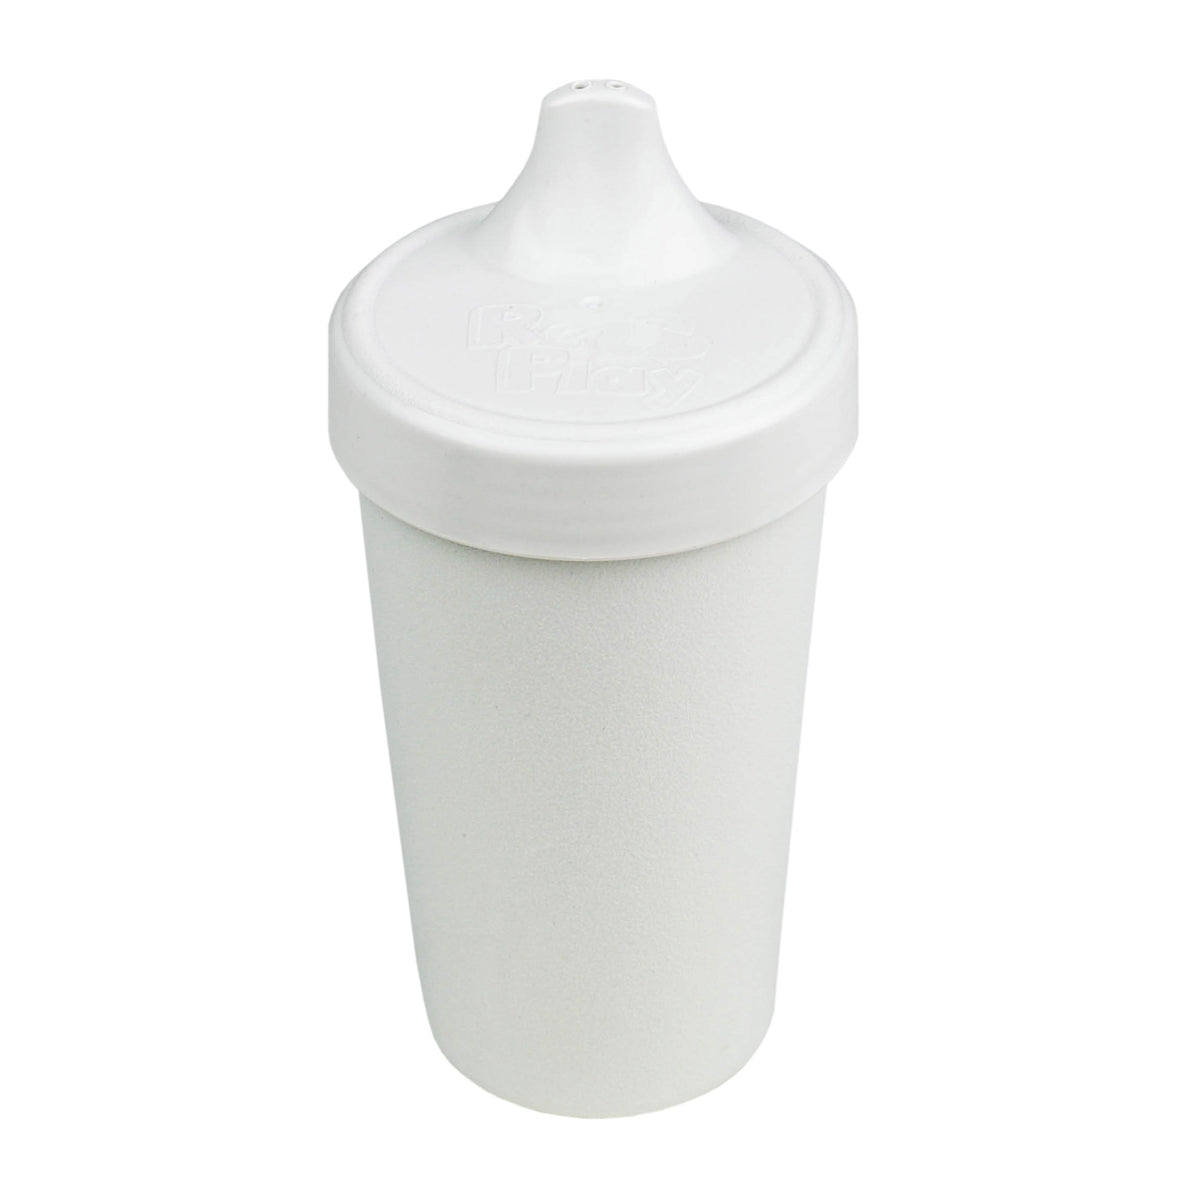 Re-Play No Spill Sippy Cup - Leaf